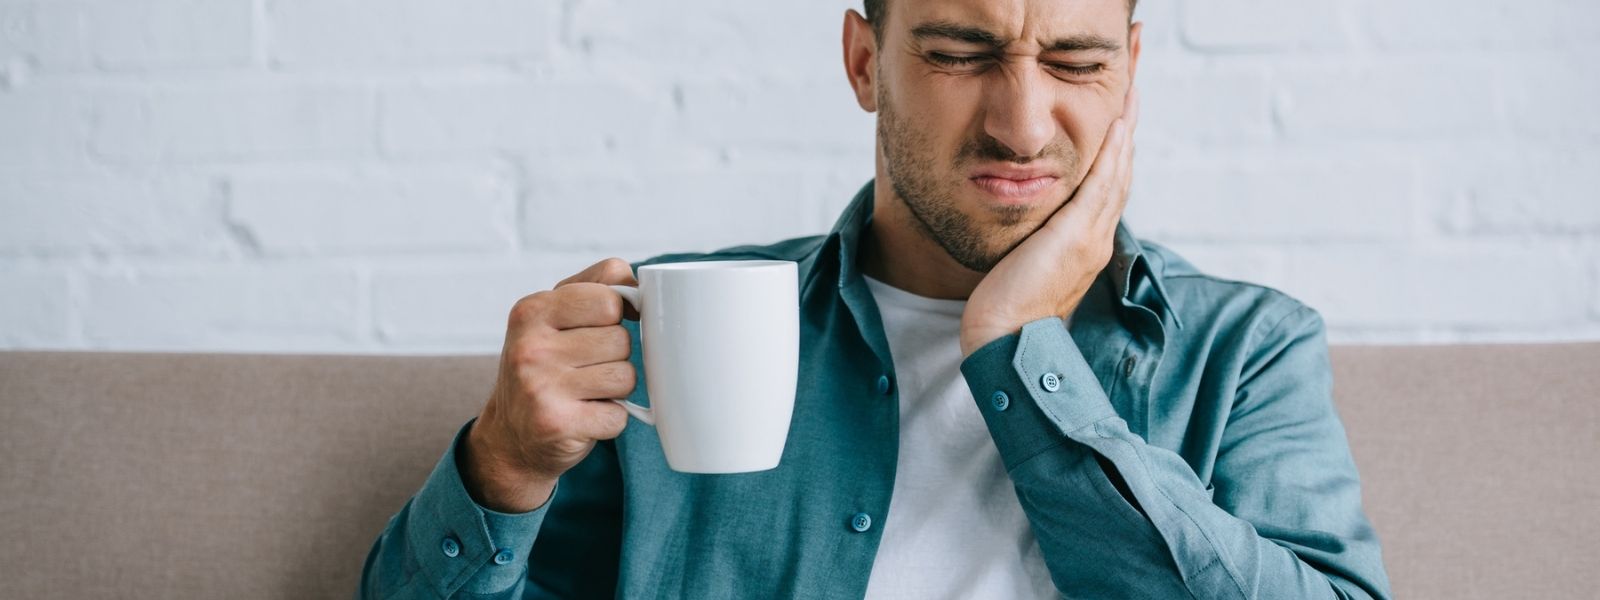 Man suffering from a tooth ache while holding a coffee mug with one hand.